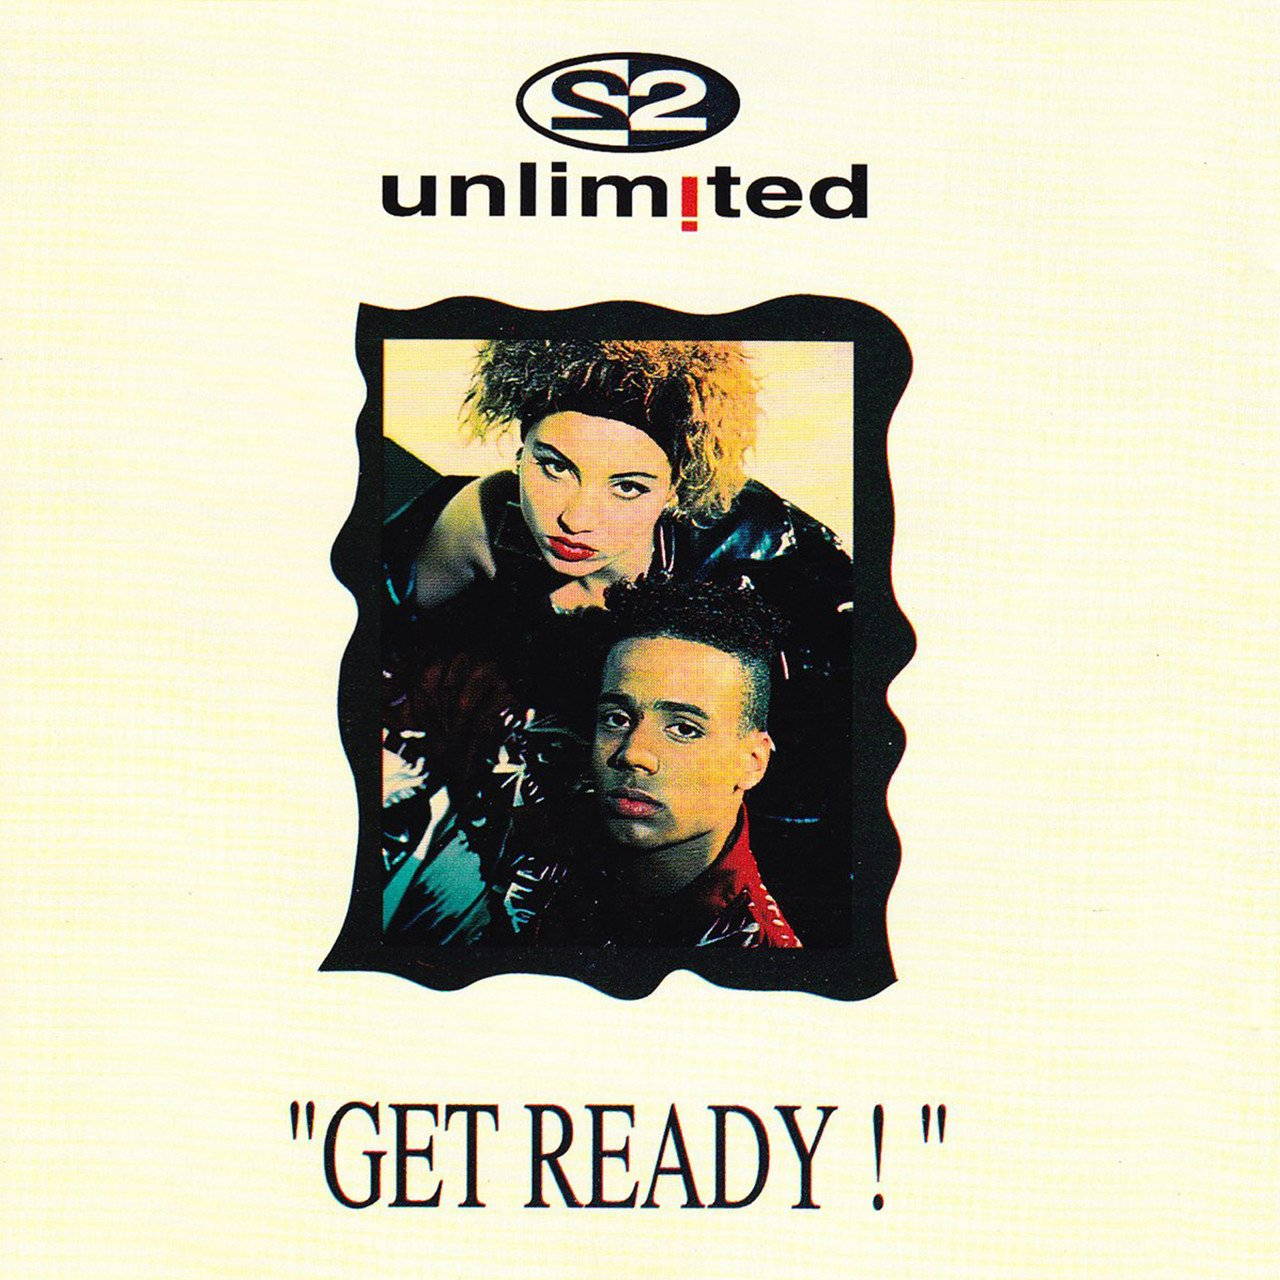 Электроника Maschina Records 2 Unlimited - Get Ready! (Limited Edition) (2LP) аудио диск sparks annette ost unlimited edition 2cd